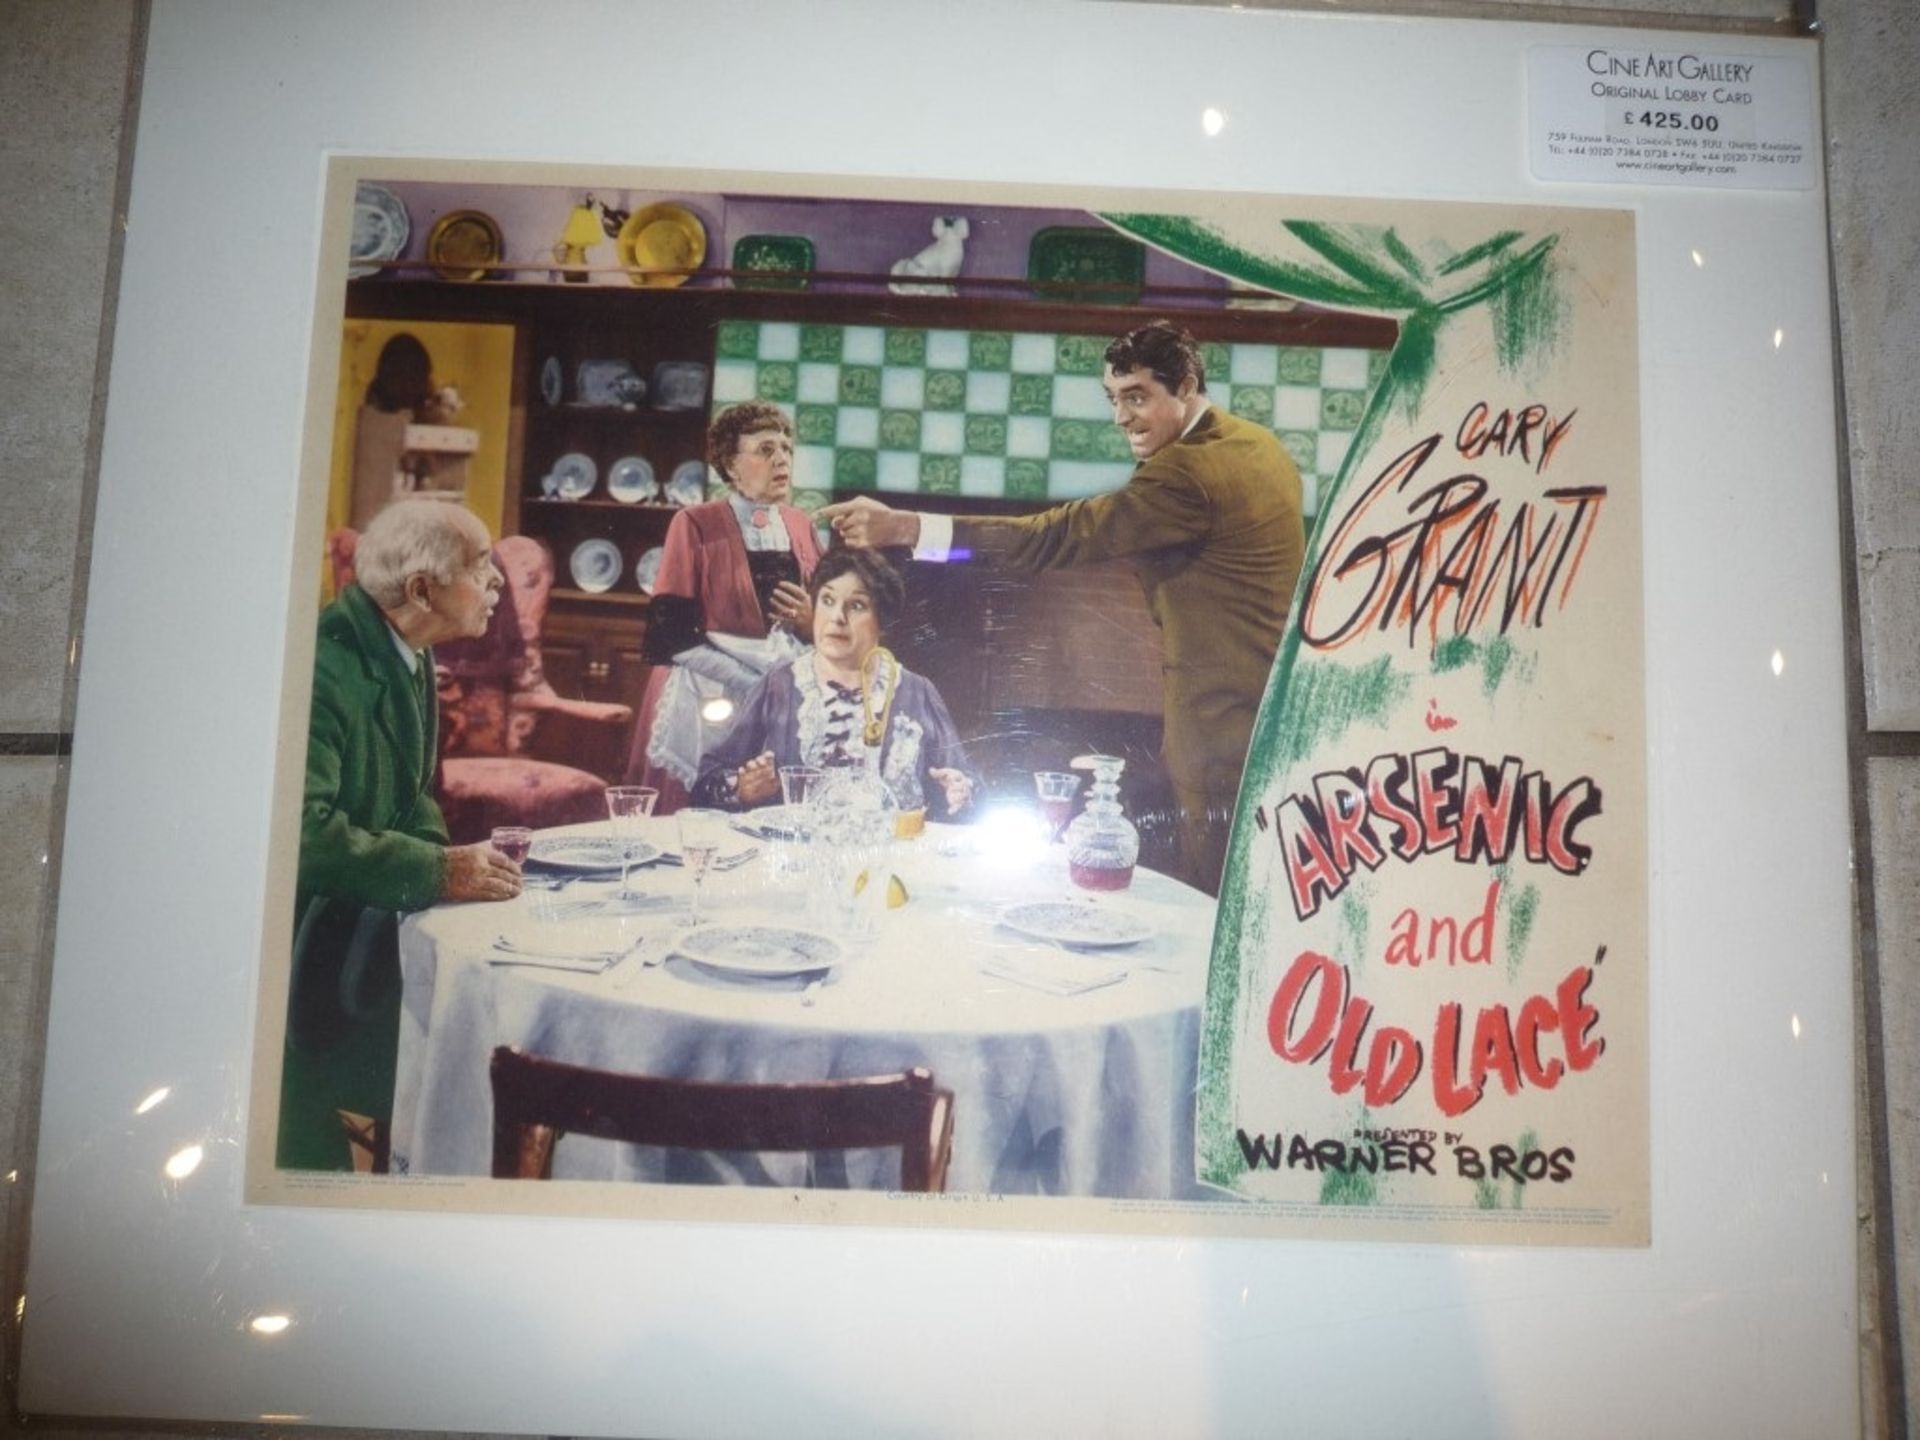 Arsenic and Old Lace lobby card - Image 2 of 2